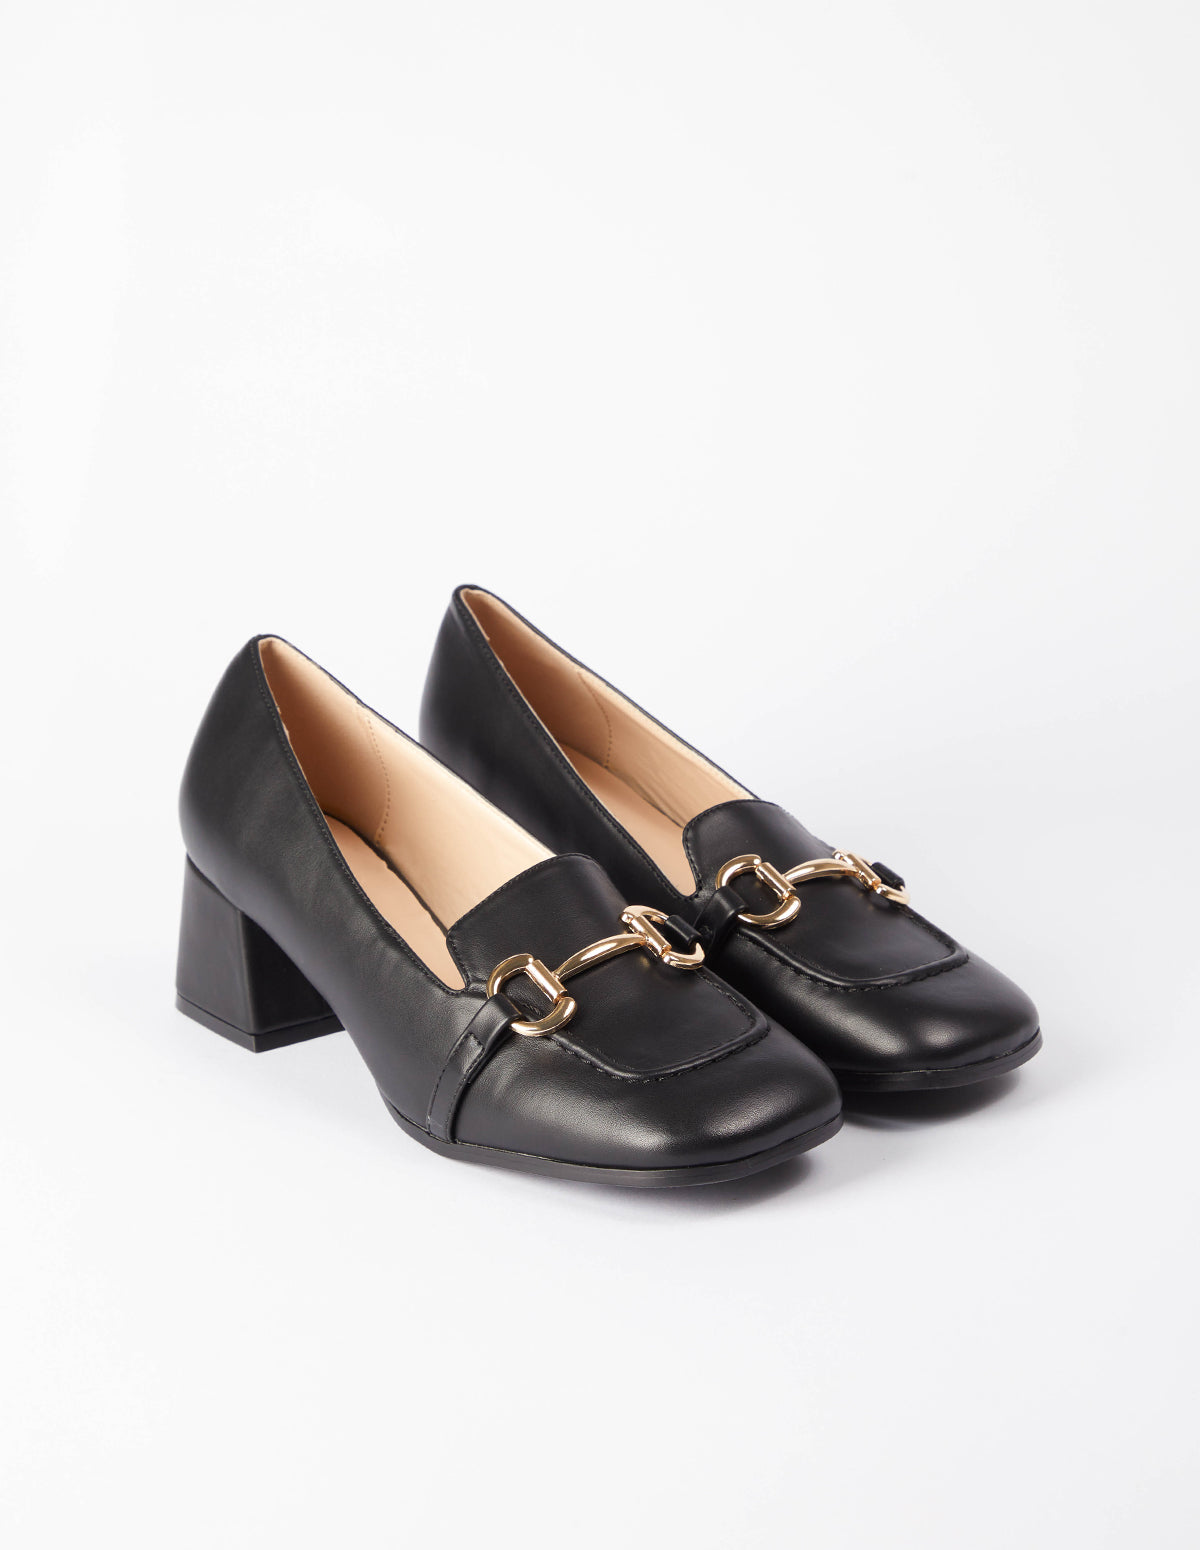 Gold Detail Heeled Loafers - Mar